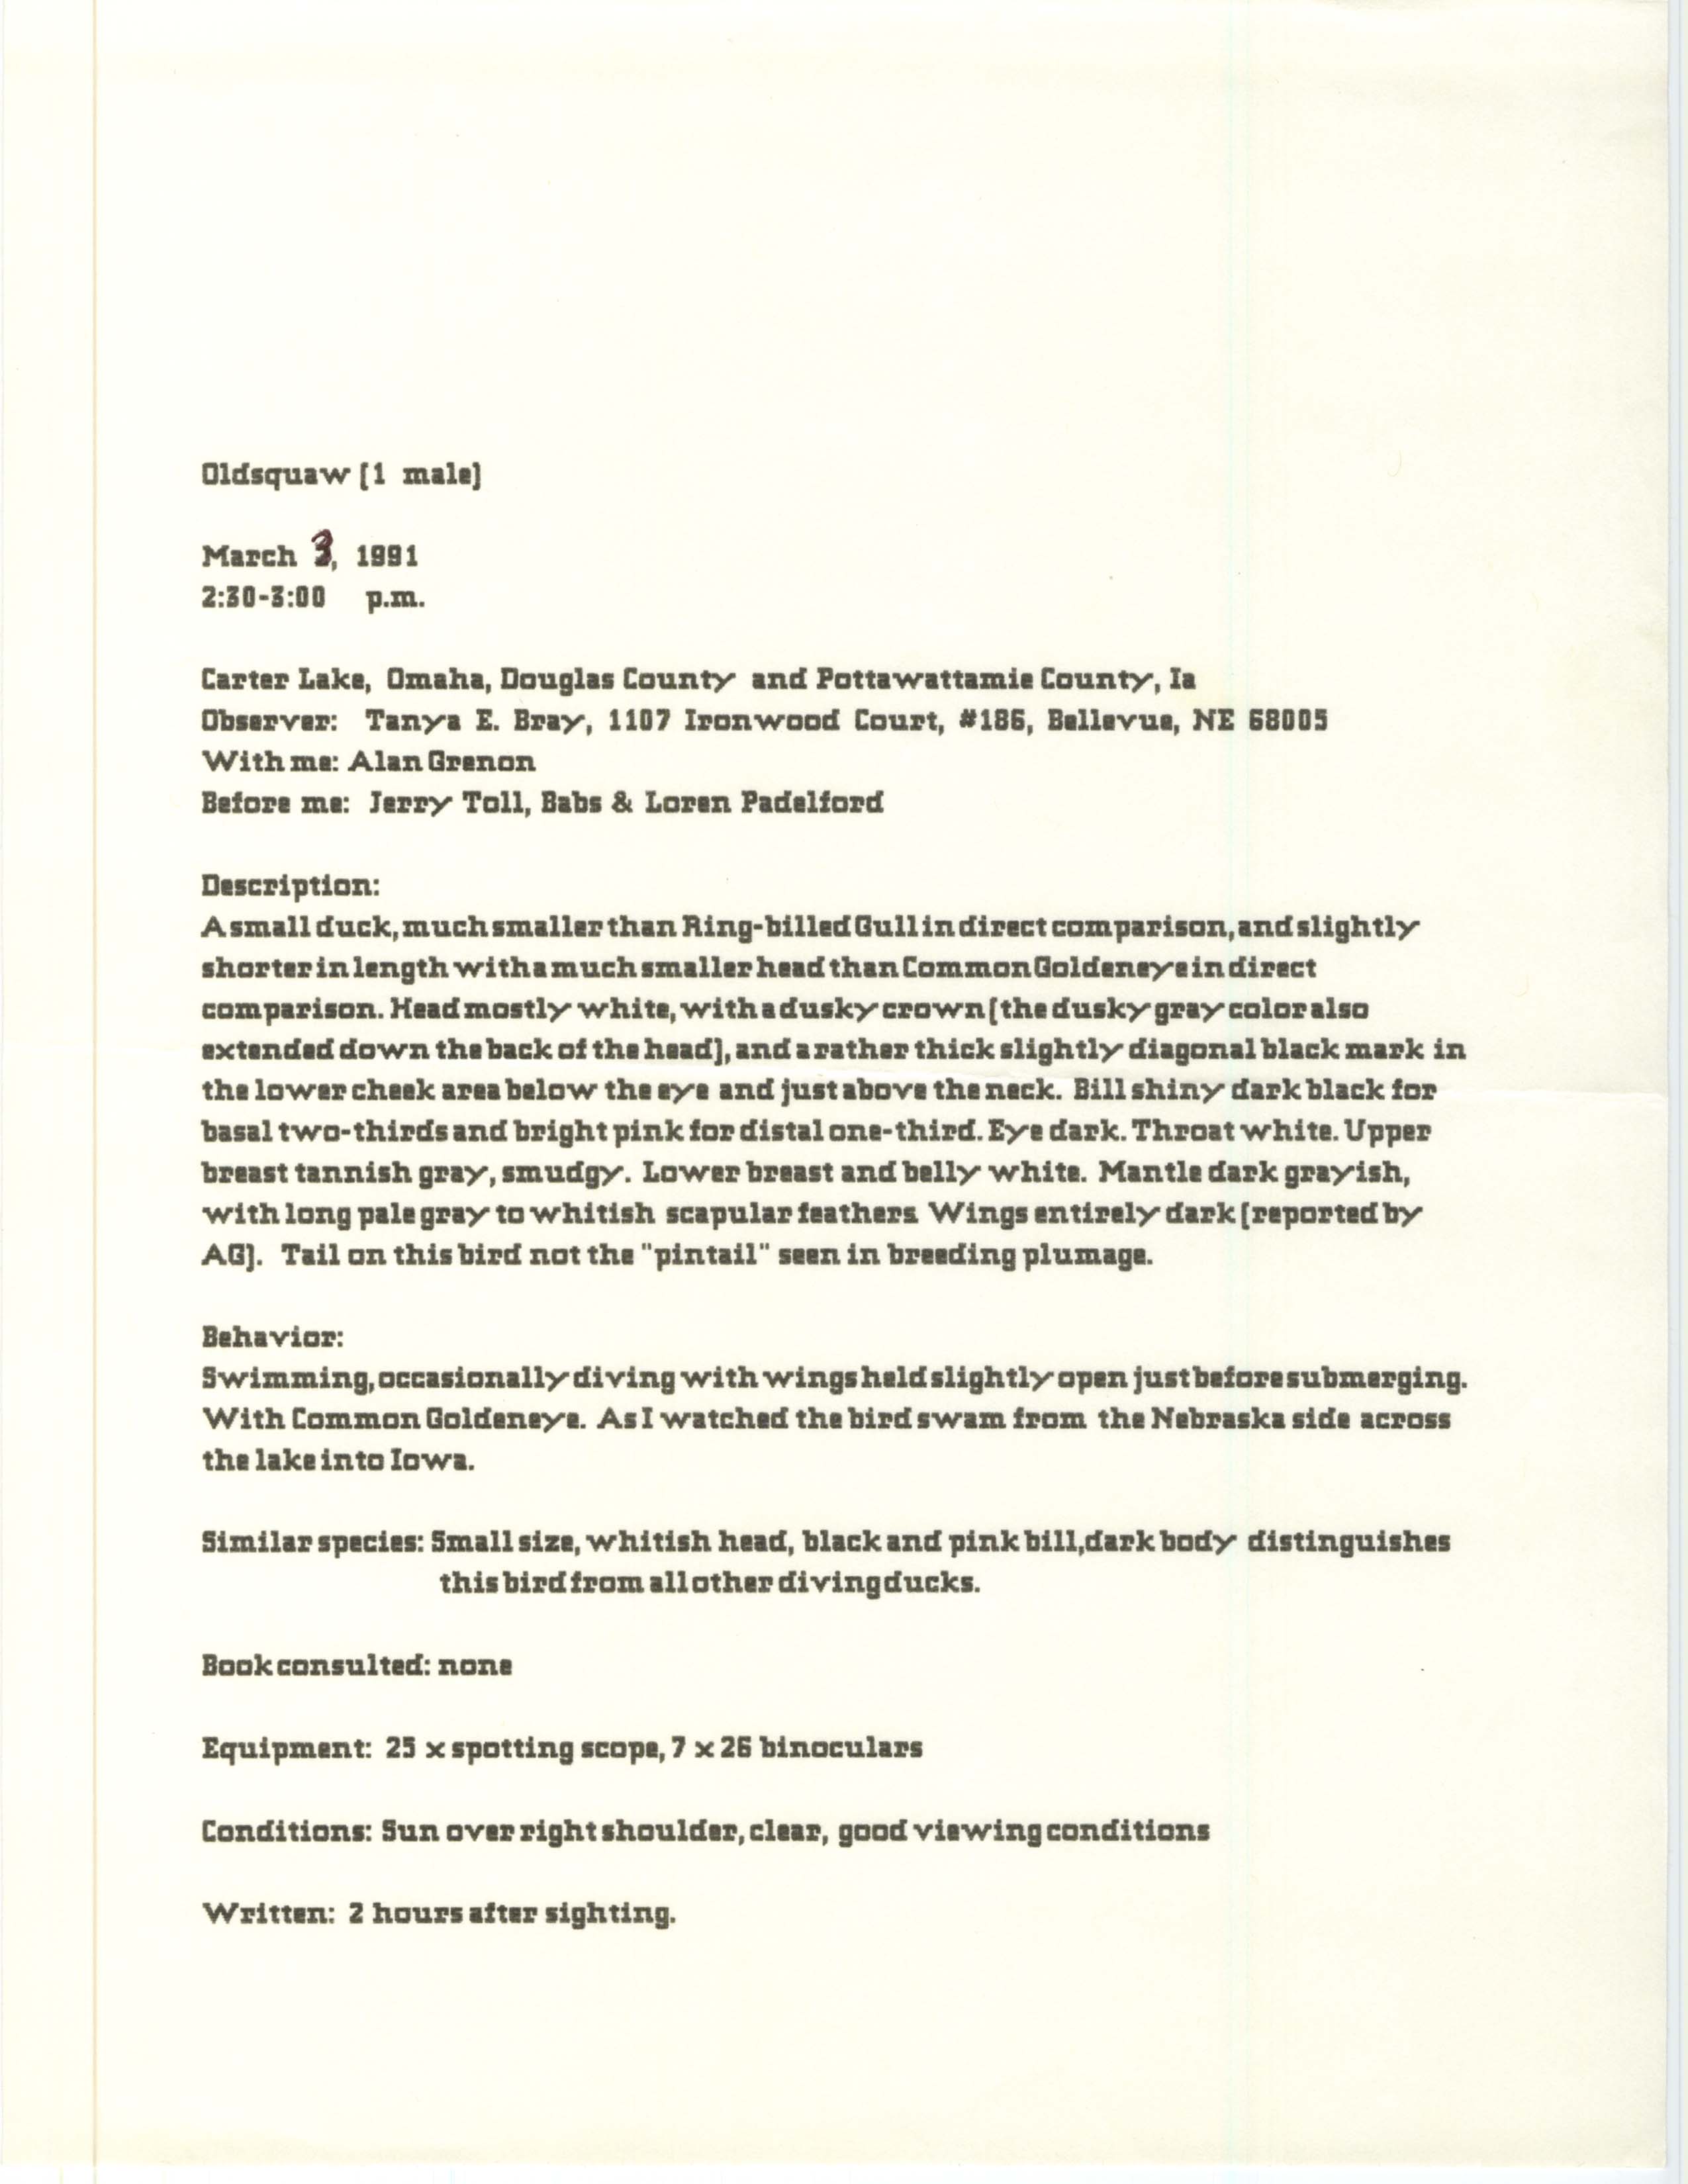 Rare bird documentation form for Long-tailed Duck at Carter Lake, 1991